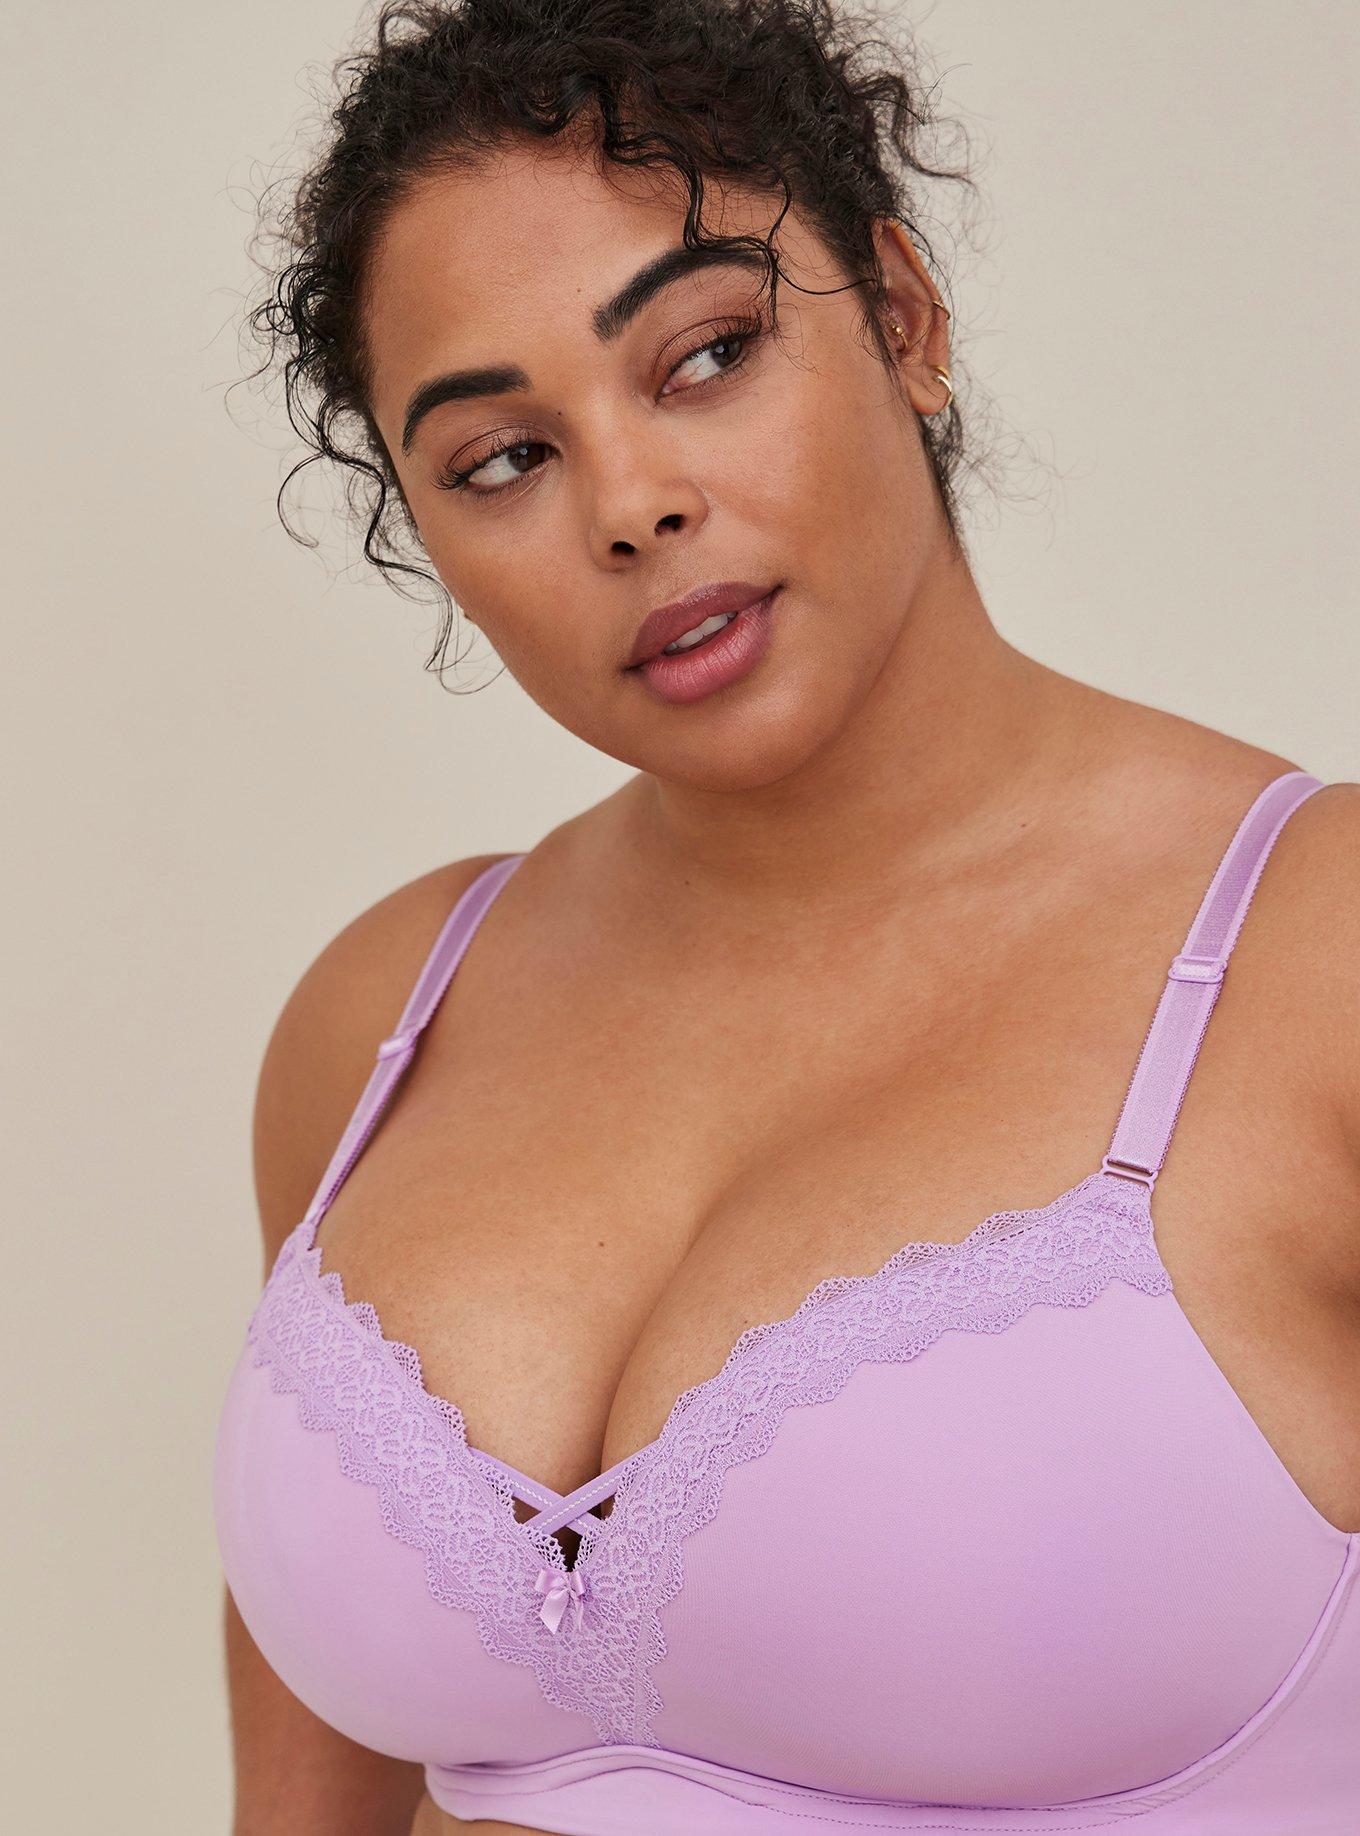 Torrid Plus Size 42DDD Bra Back Smoothing Push Up Plunge Purple Black Lace  1457 - $31 - From Bailey